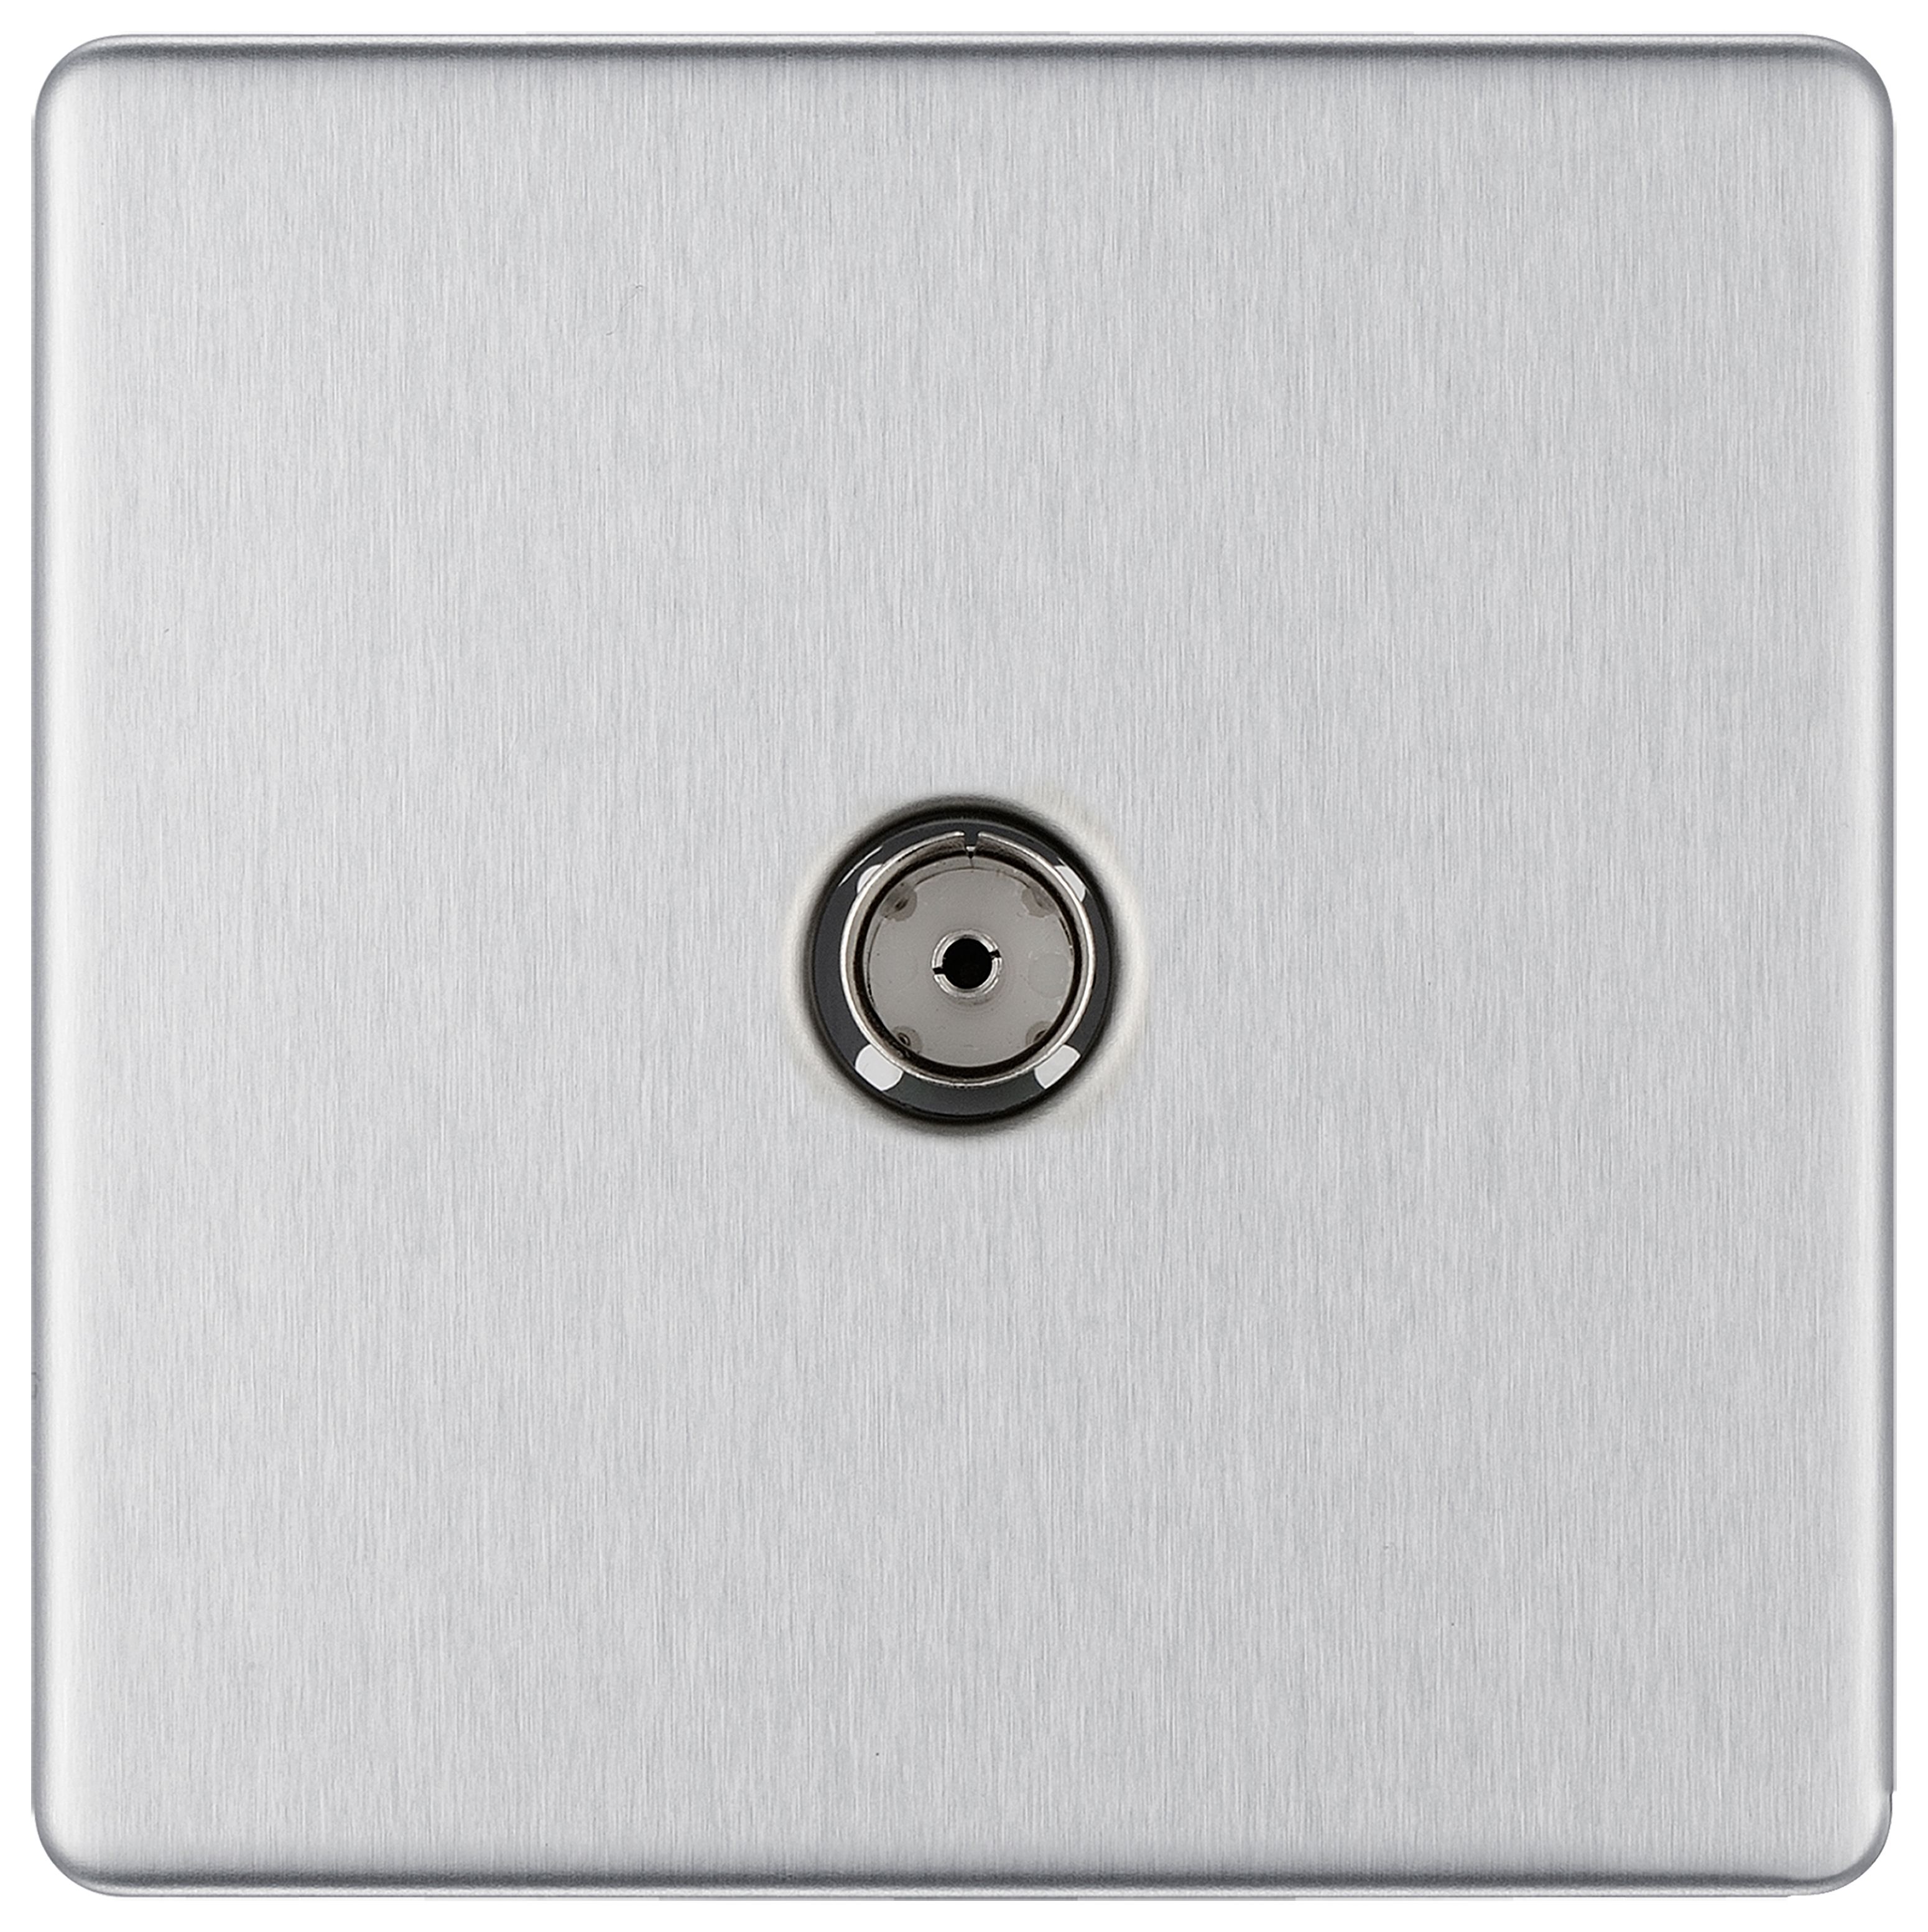 Image of BG Screwless Flatplate Brushed Steel Single Socket For Tv Or Fm Co-Axial Aerial Connection